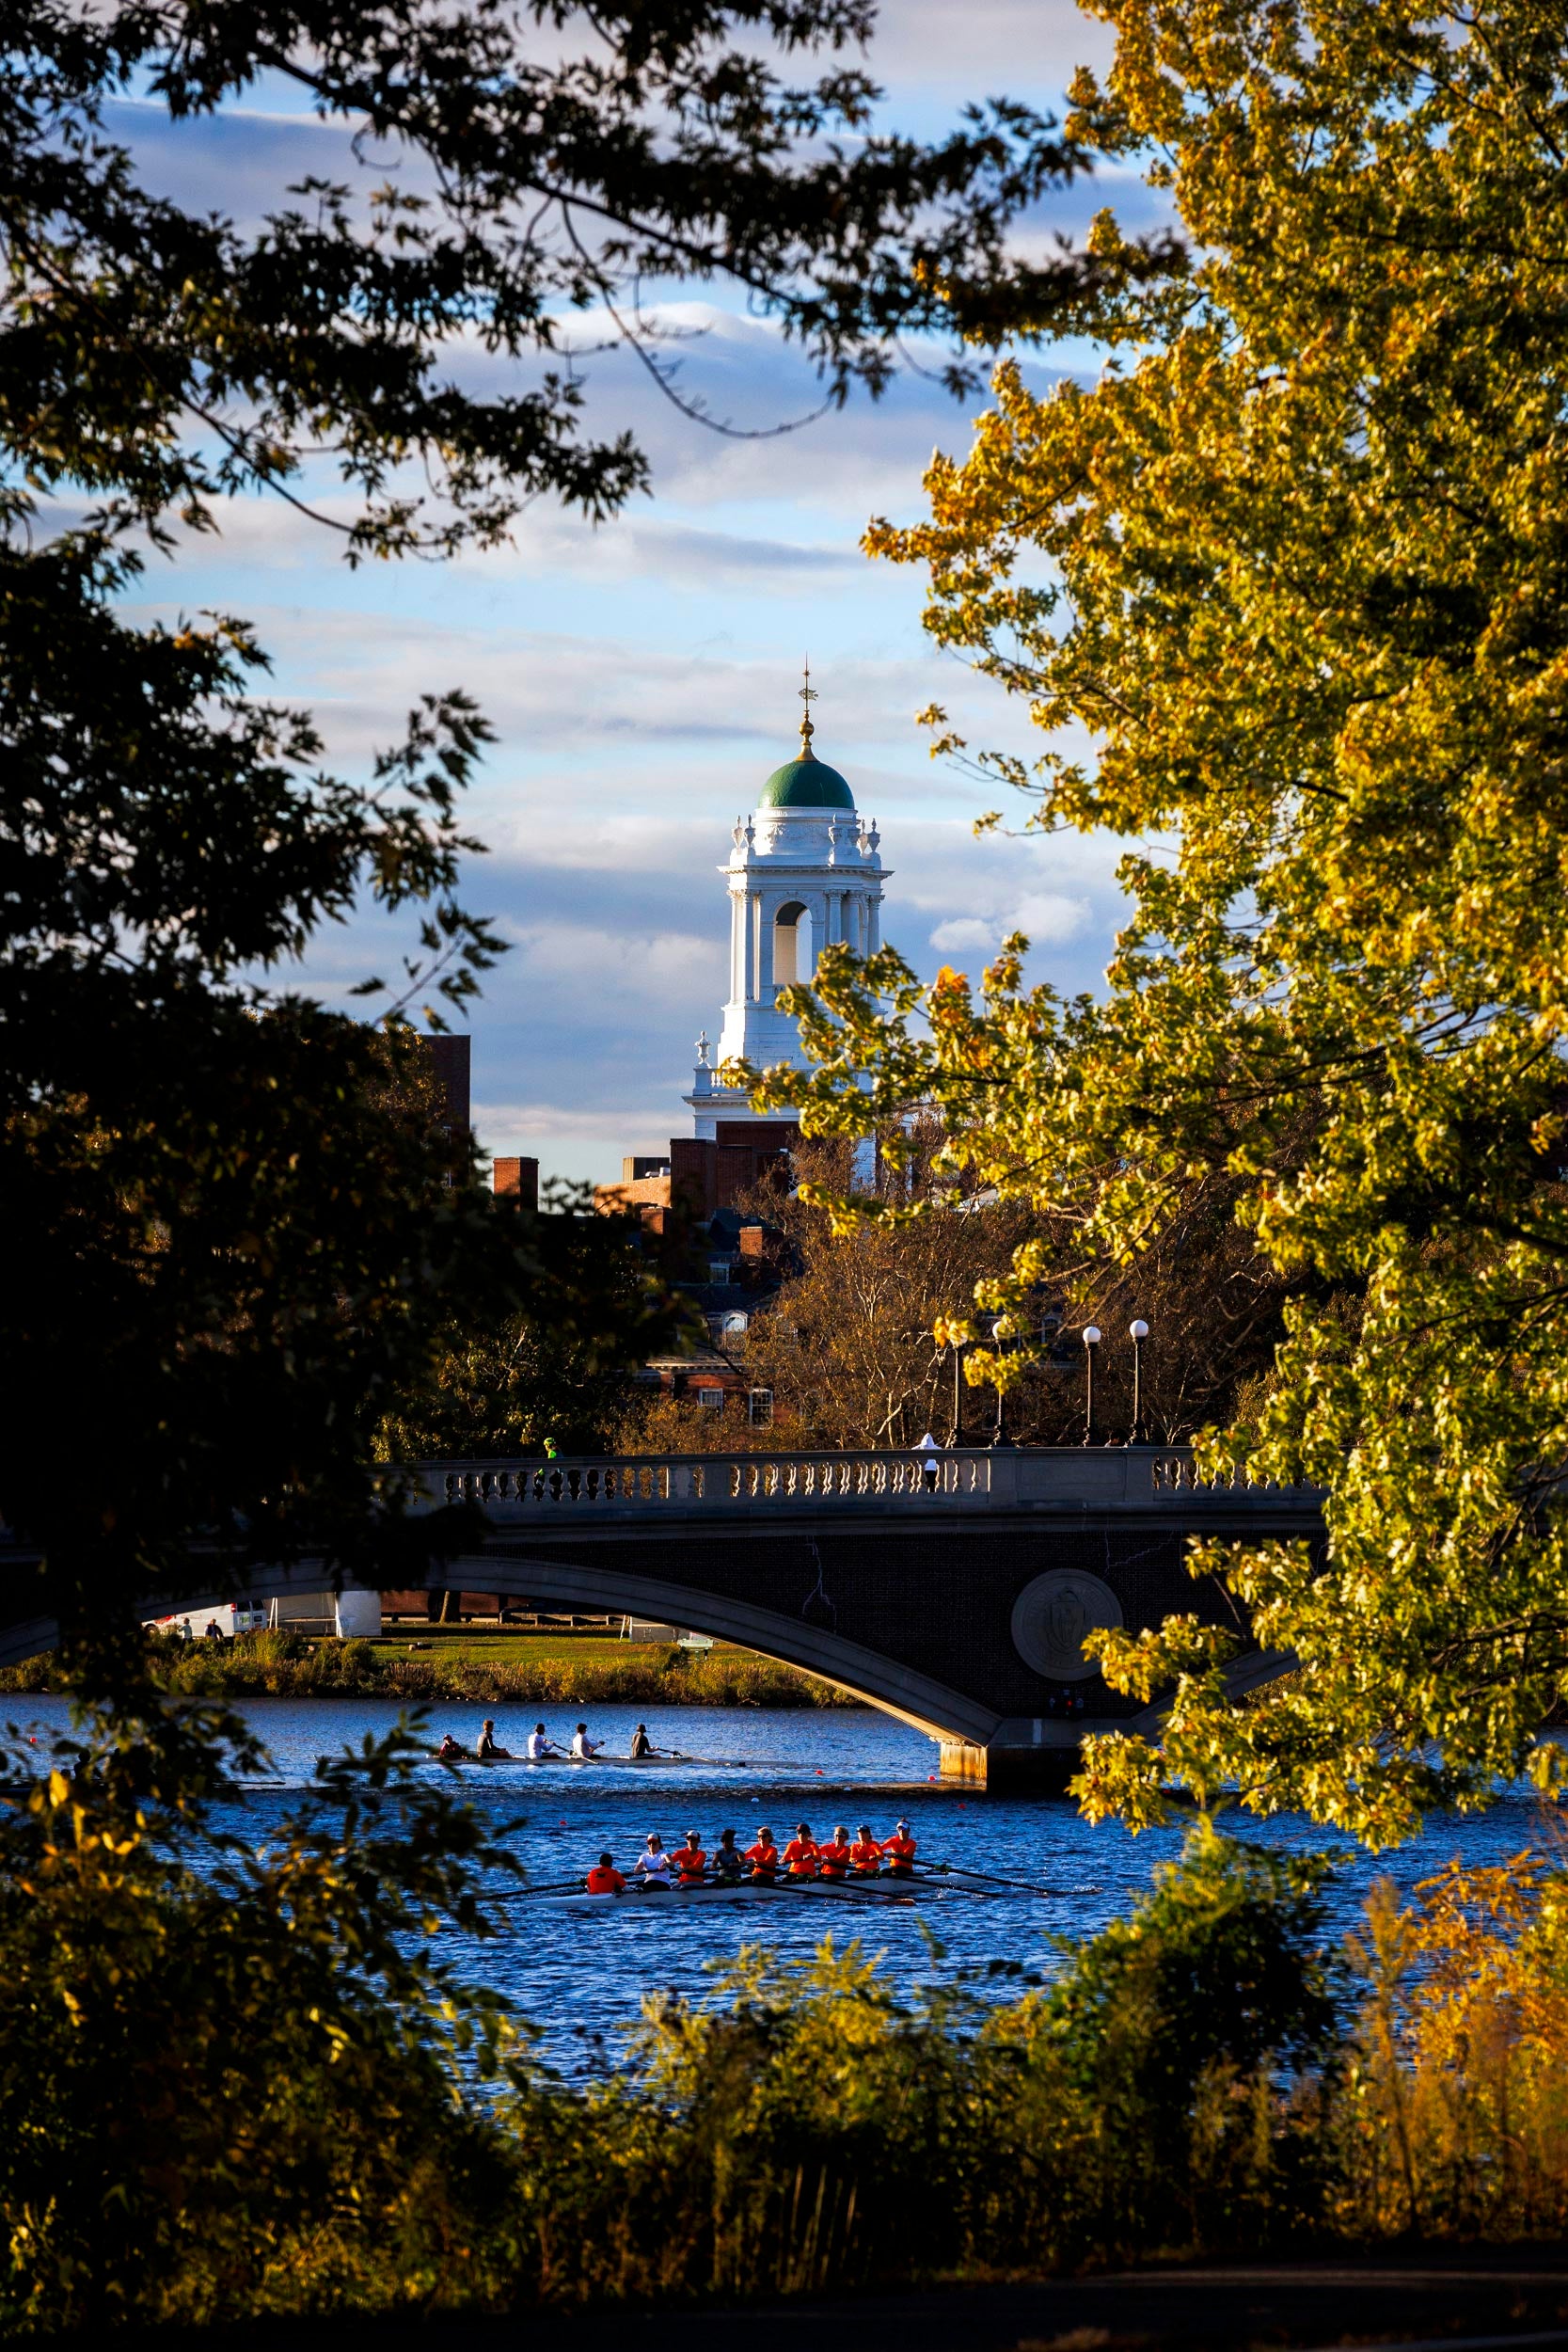 Rowers are pictured along the Charles River with the Eliot House tower in the background.